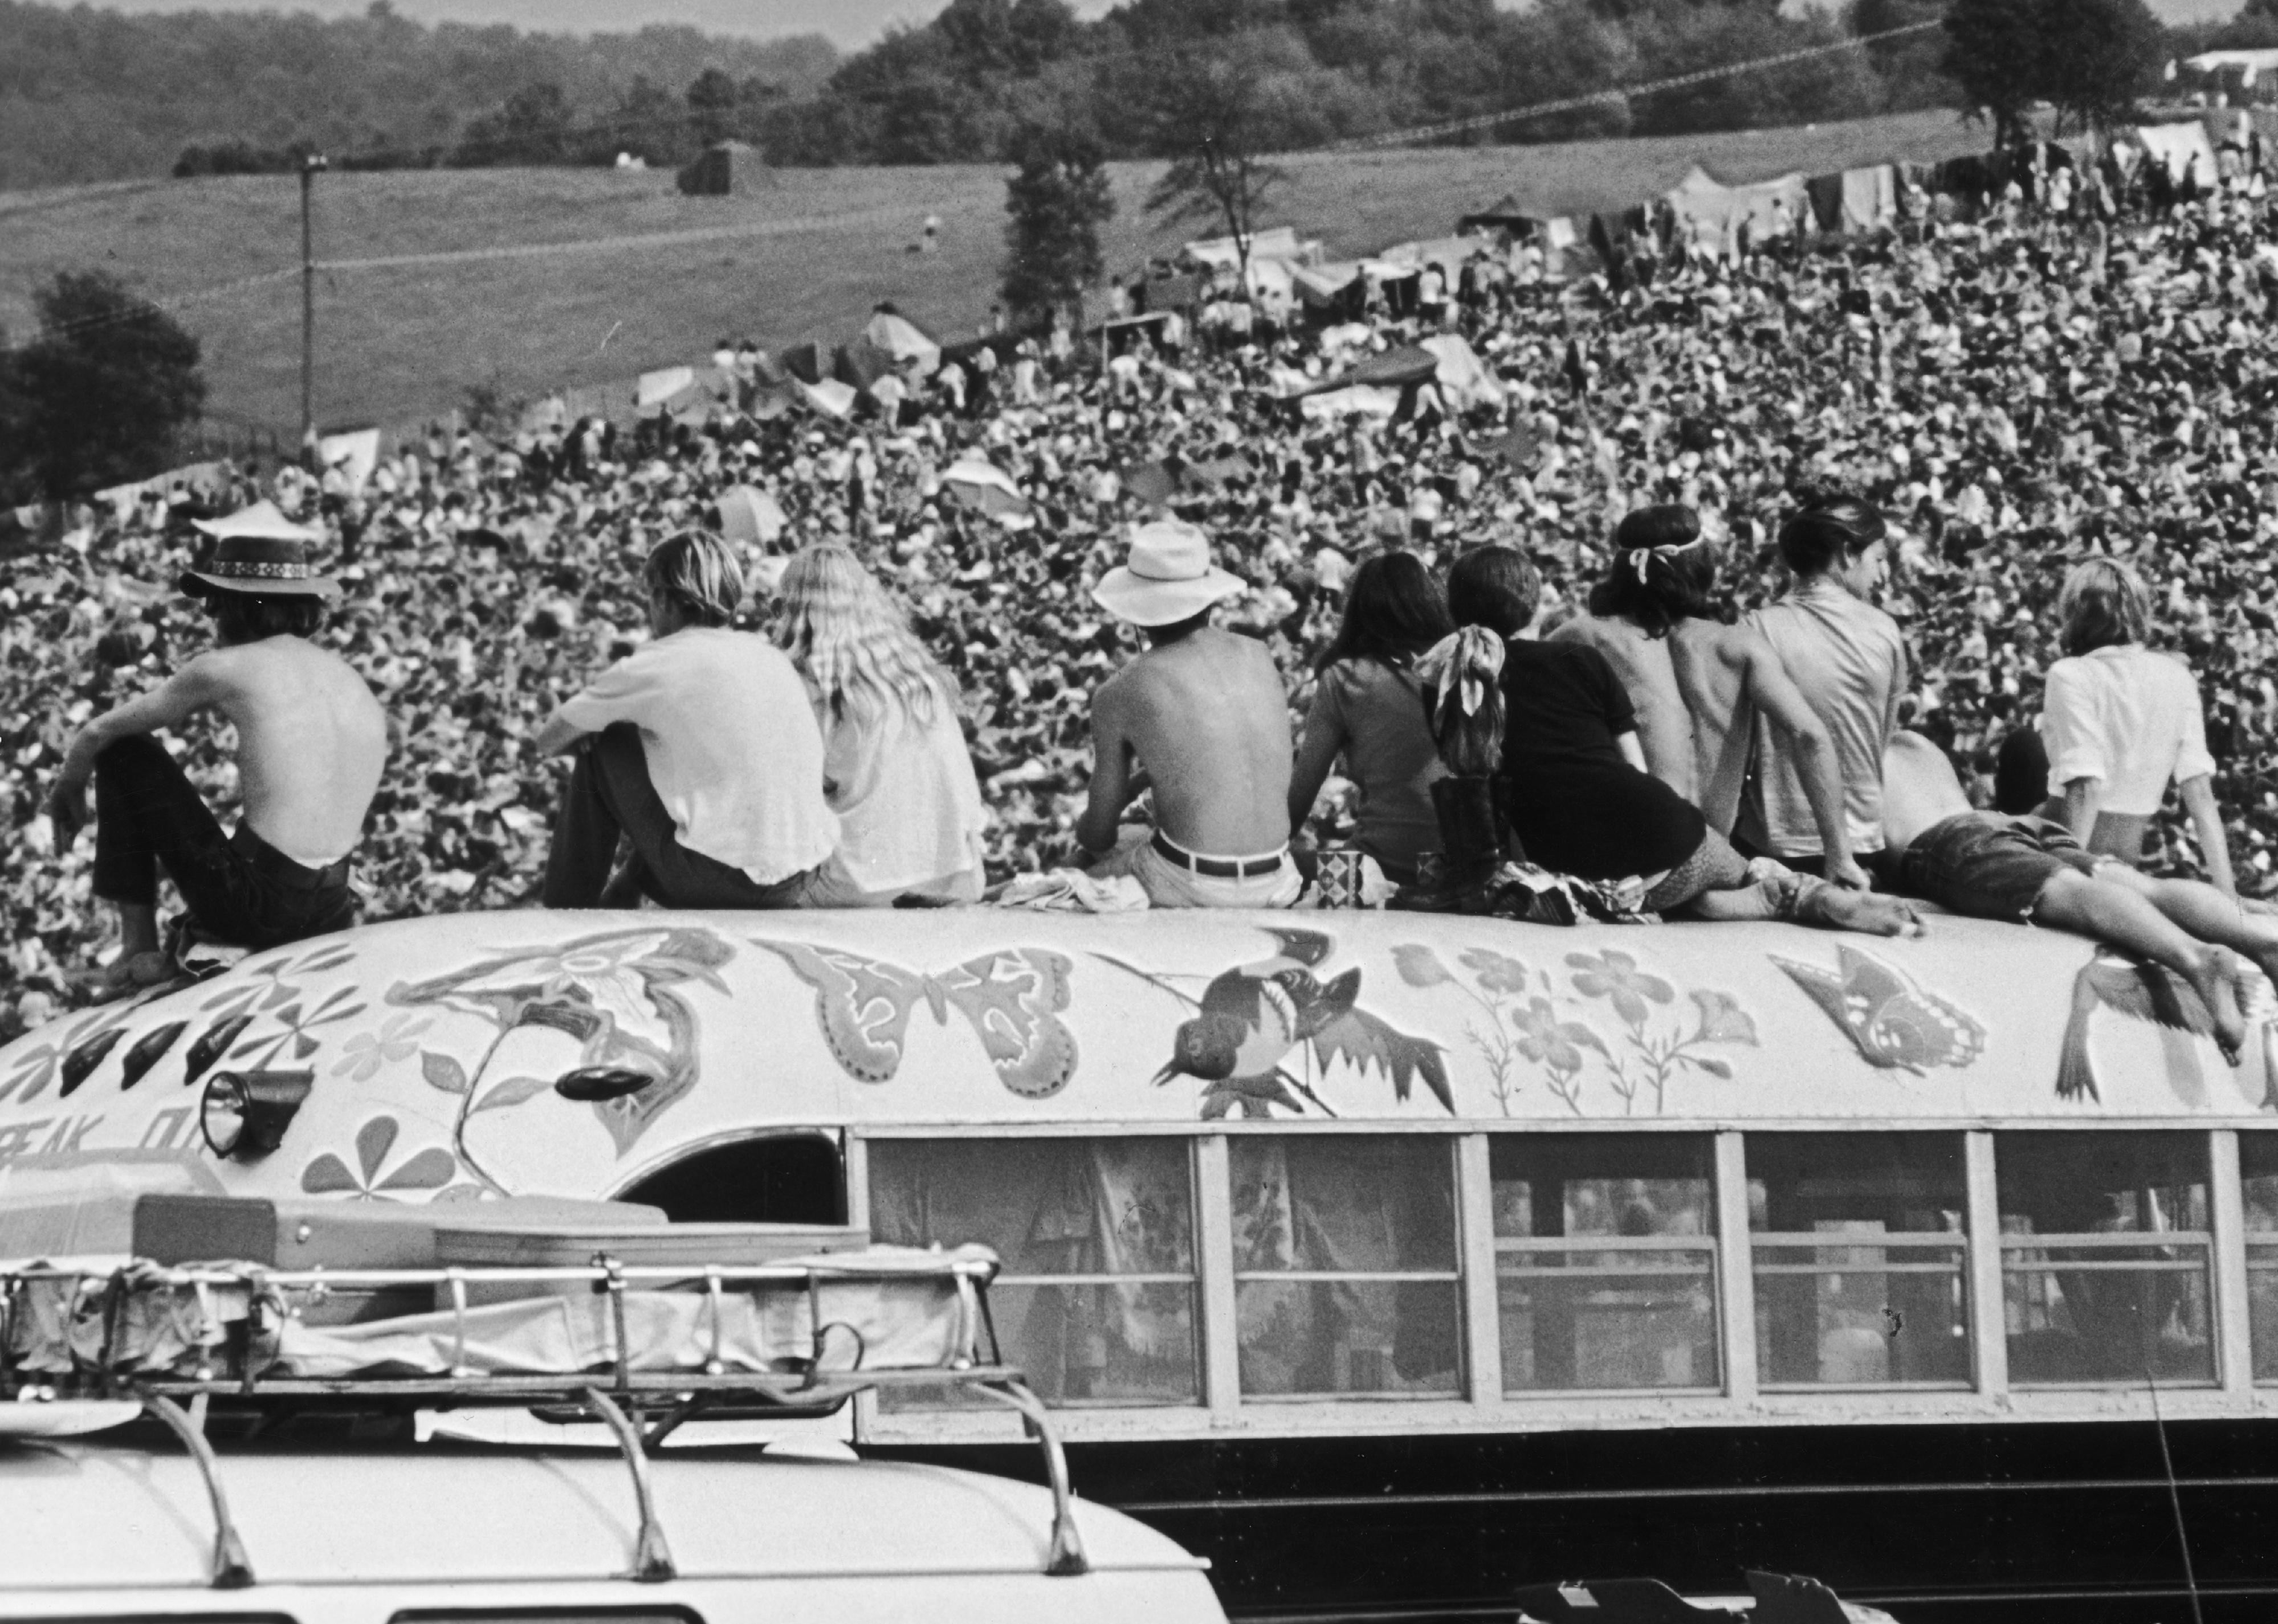 <p>History's most famous music festival didn't actually take place in its namesake town, but a nearby farm in Bethel, New York. People from every corner of the world gathered for three days and took in one iconic performance after the next. Mudslides and unsanitary conditions notwithstanding, it was considered a benchmark event for the hippie era.</p> <p><strong>You may also like:</strong> <a href="https://stacker.com/music/25-great-movie-soundtracks-60s-and-70s">25 great movie soundtracks of the '60s and '70s</a></p>